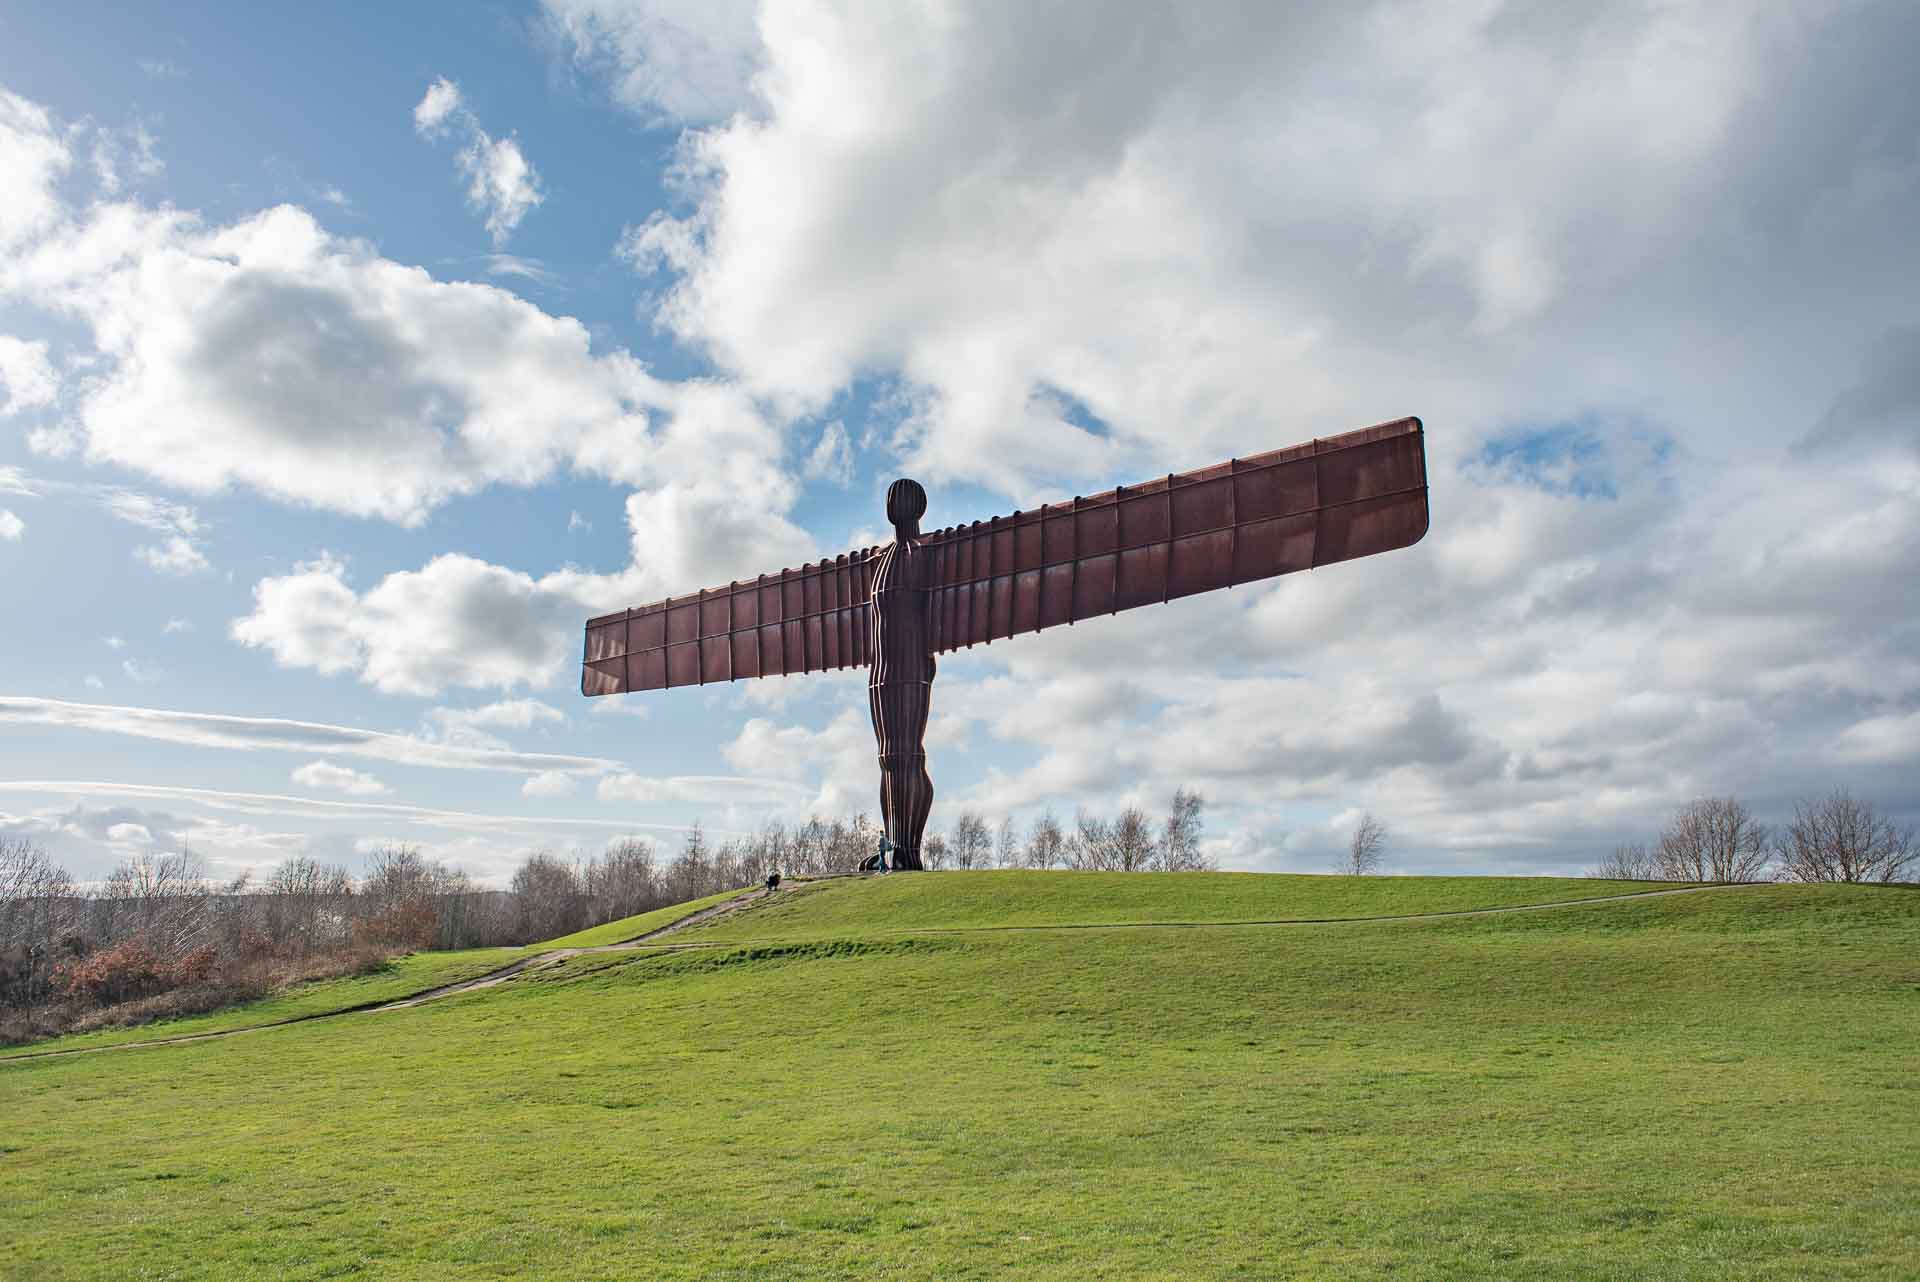 The Angel of the North in Newcastle